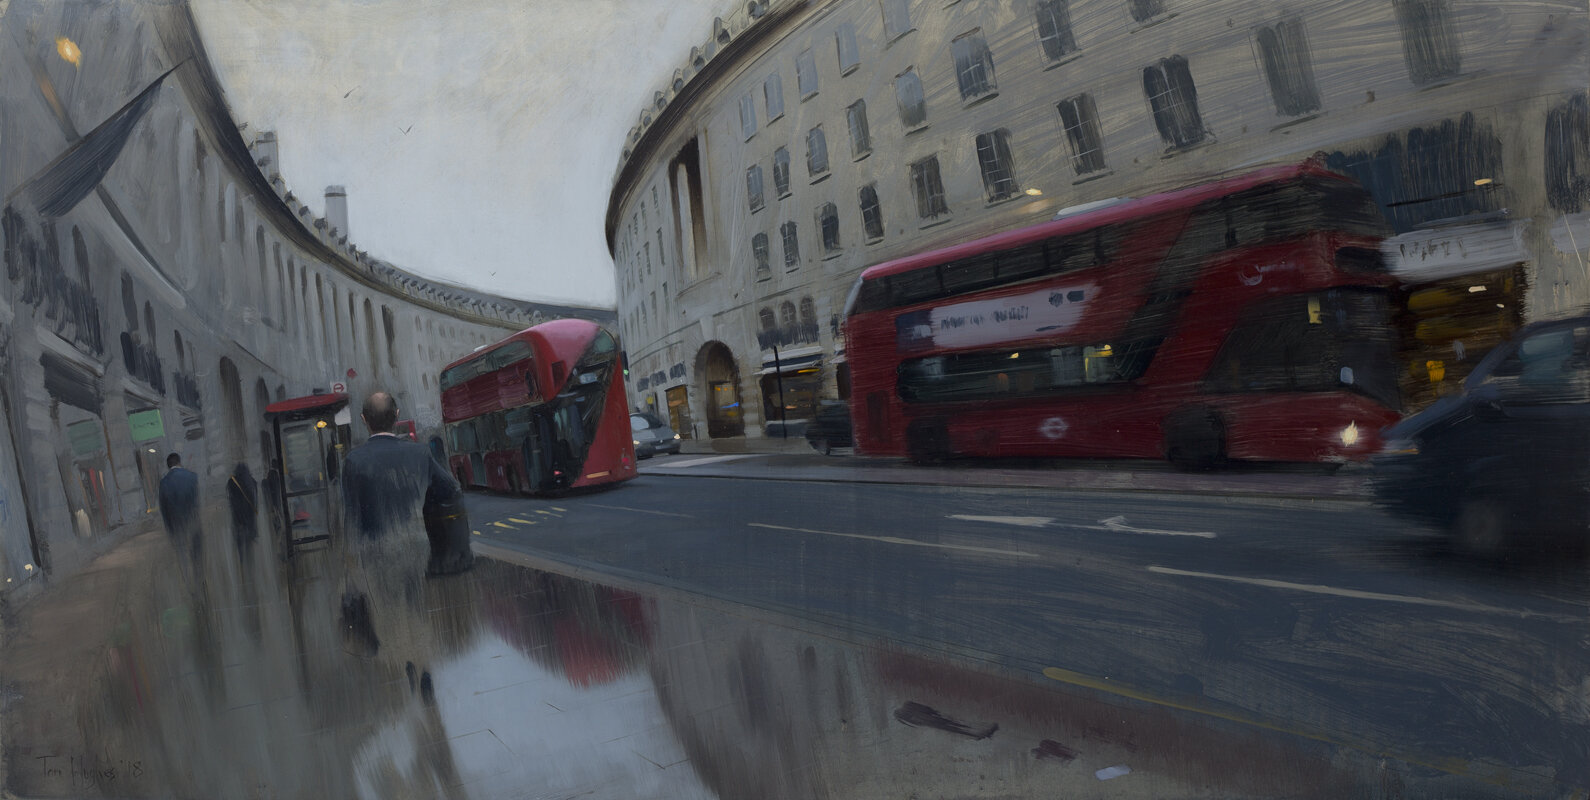 Regent street curve in rain with buses